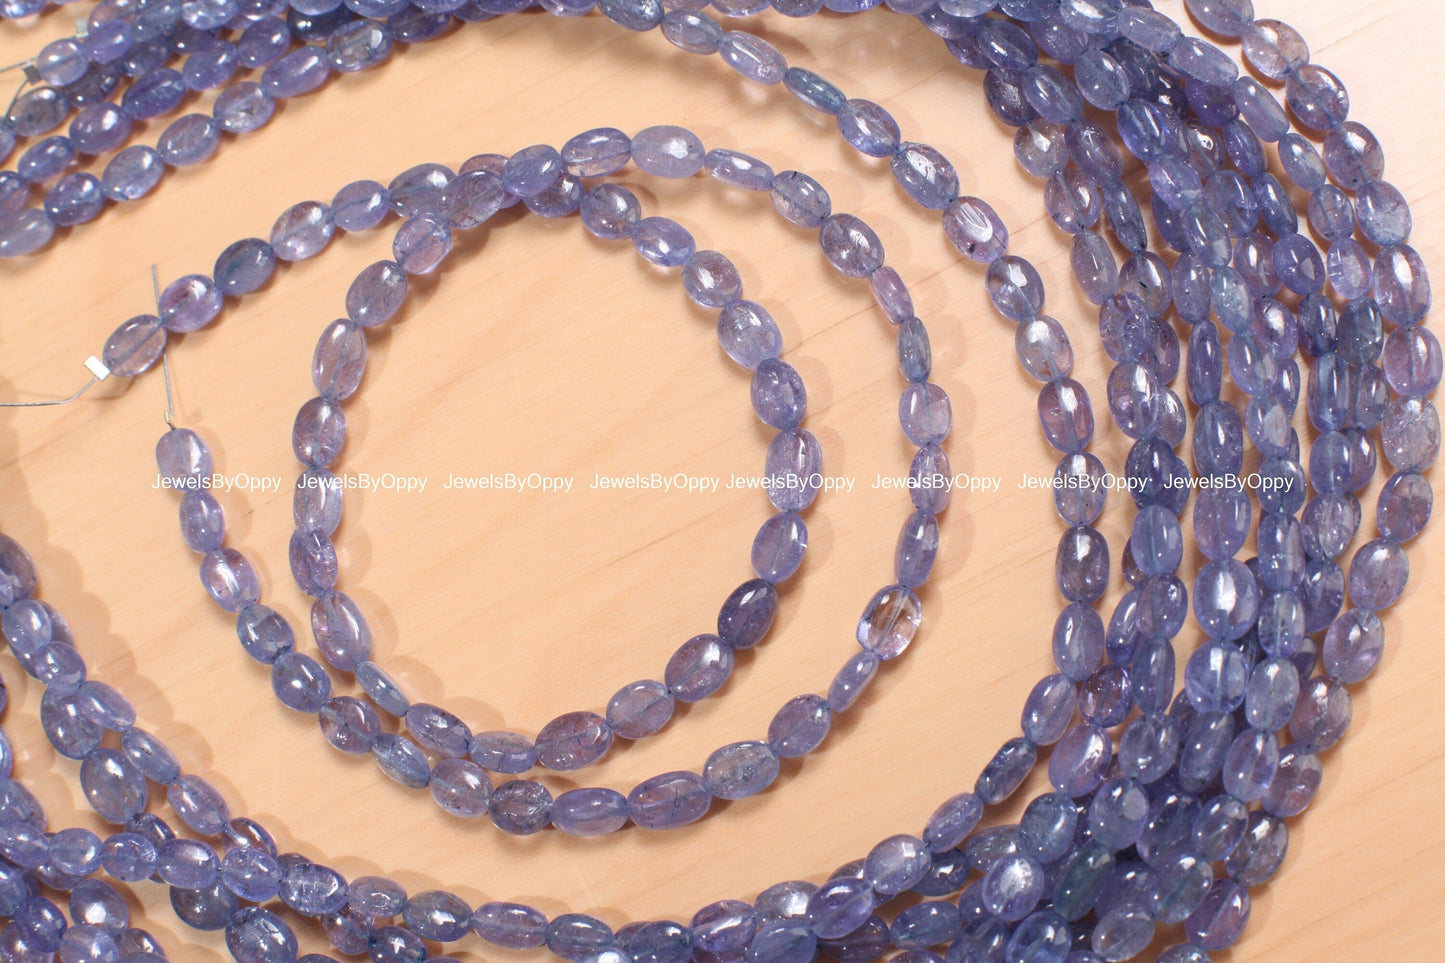 Natural Tanzanite smooth Oval bead, AAA 4x6-5x6.5mm Tanzanite Gemstone Violet Blue Beads DIY Jewelry Making 7&quot; and 14&quot; Strand